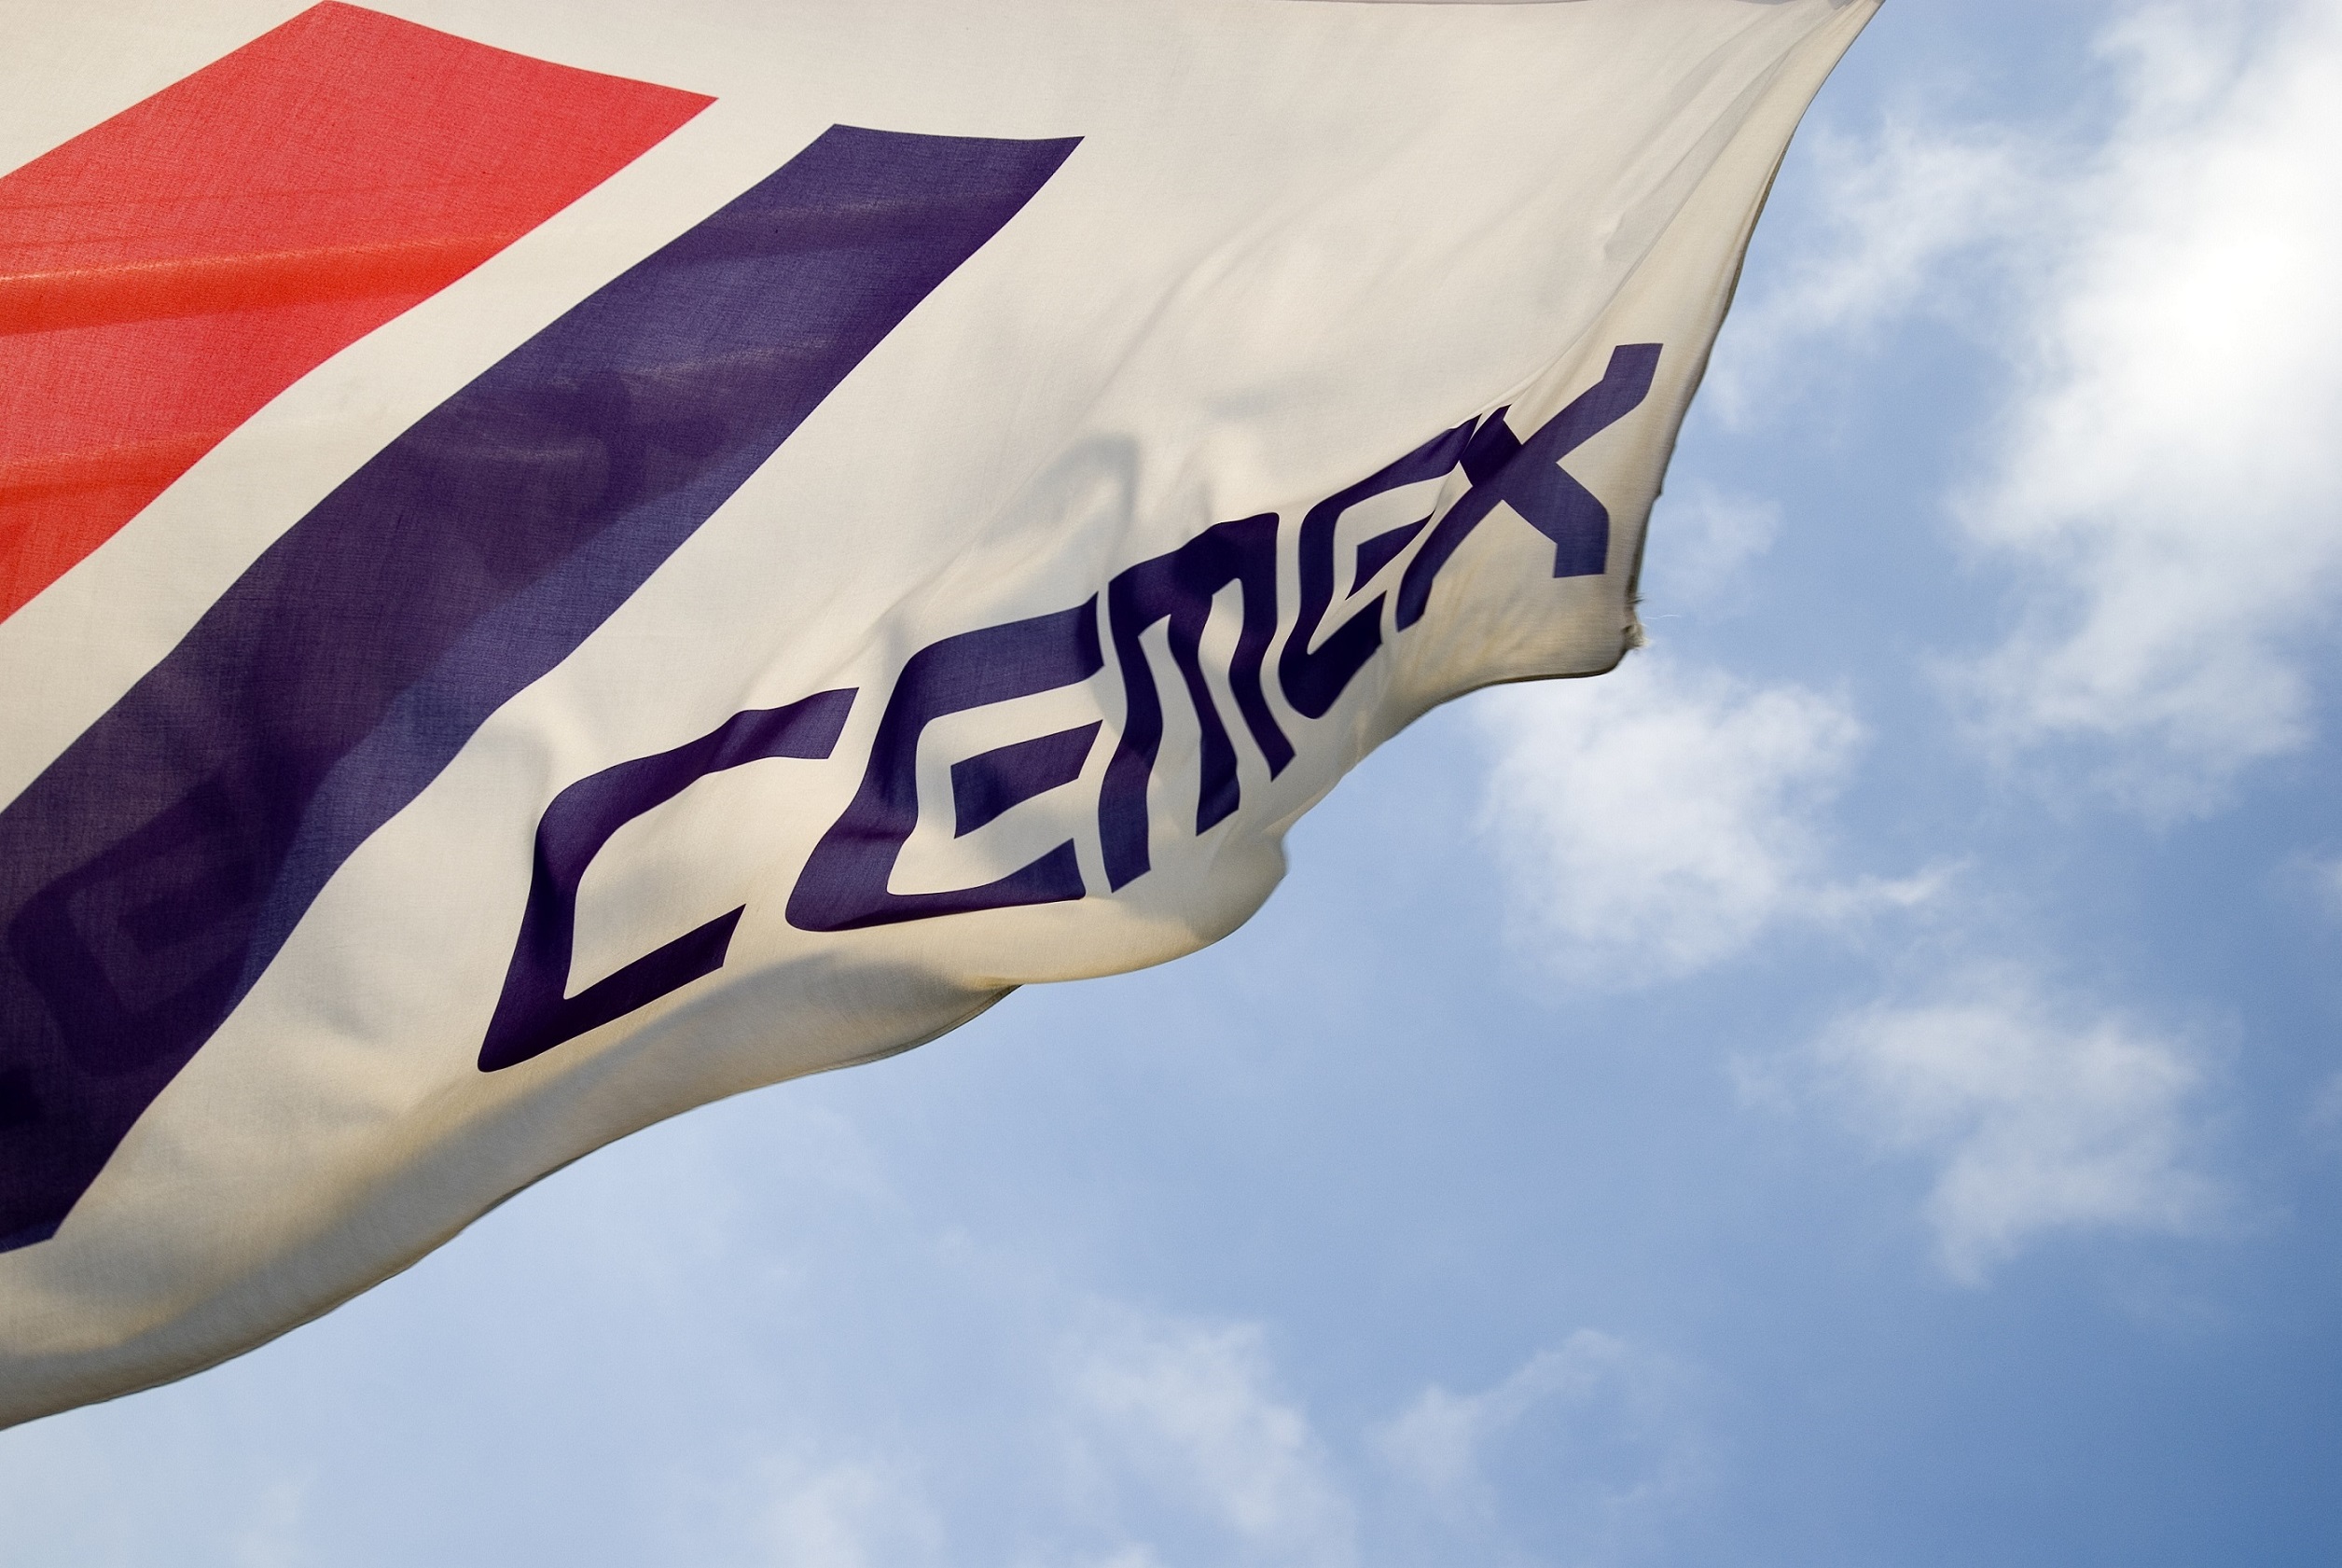 CEMEX says sustainability is a fundamental part of its business strategy